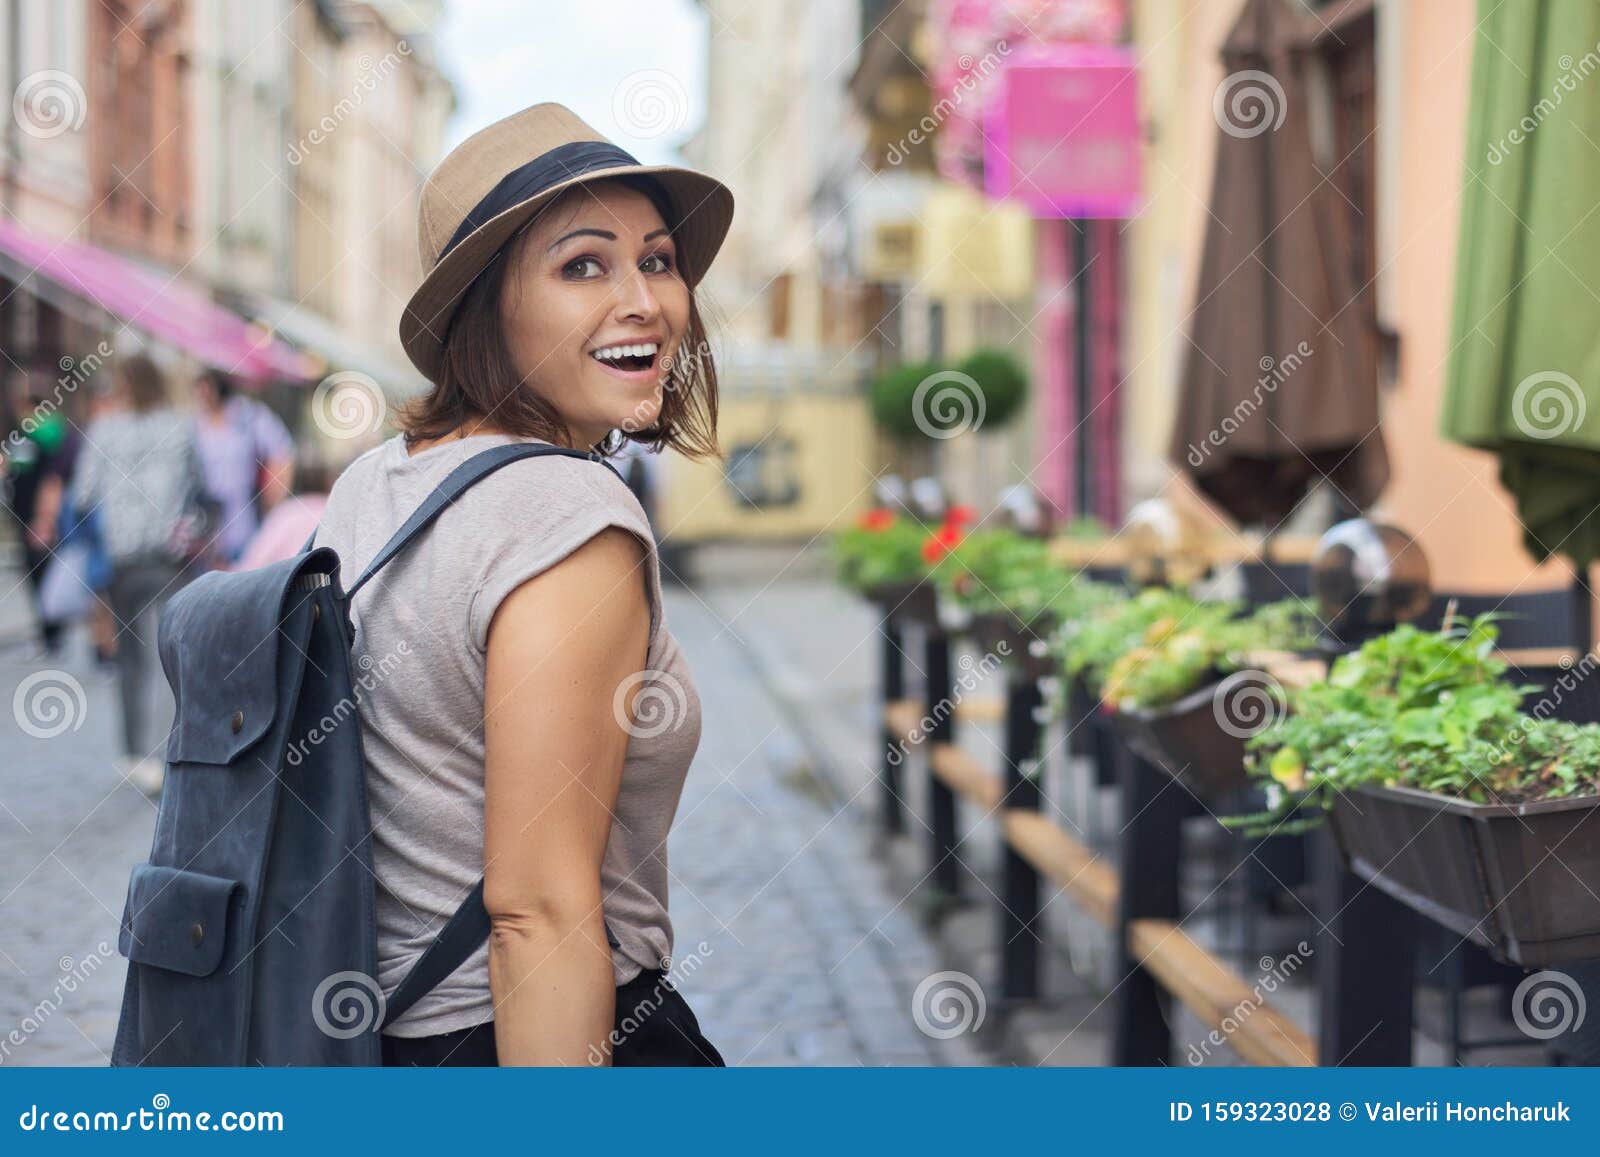 Middle Aged Smiling Woman in Hat Traveling in Tourist City Stock Photo ...